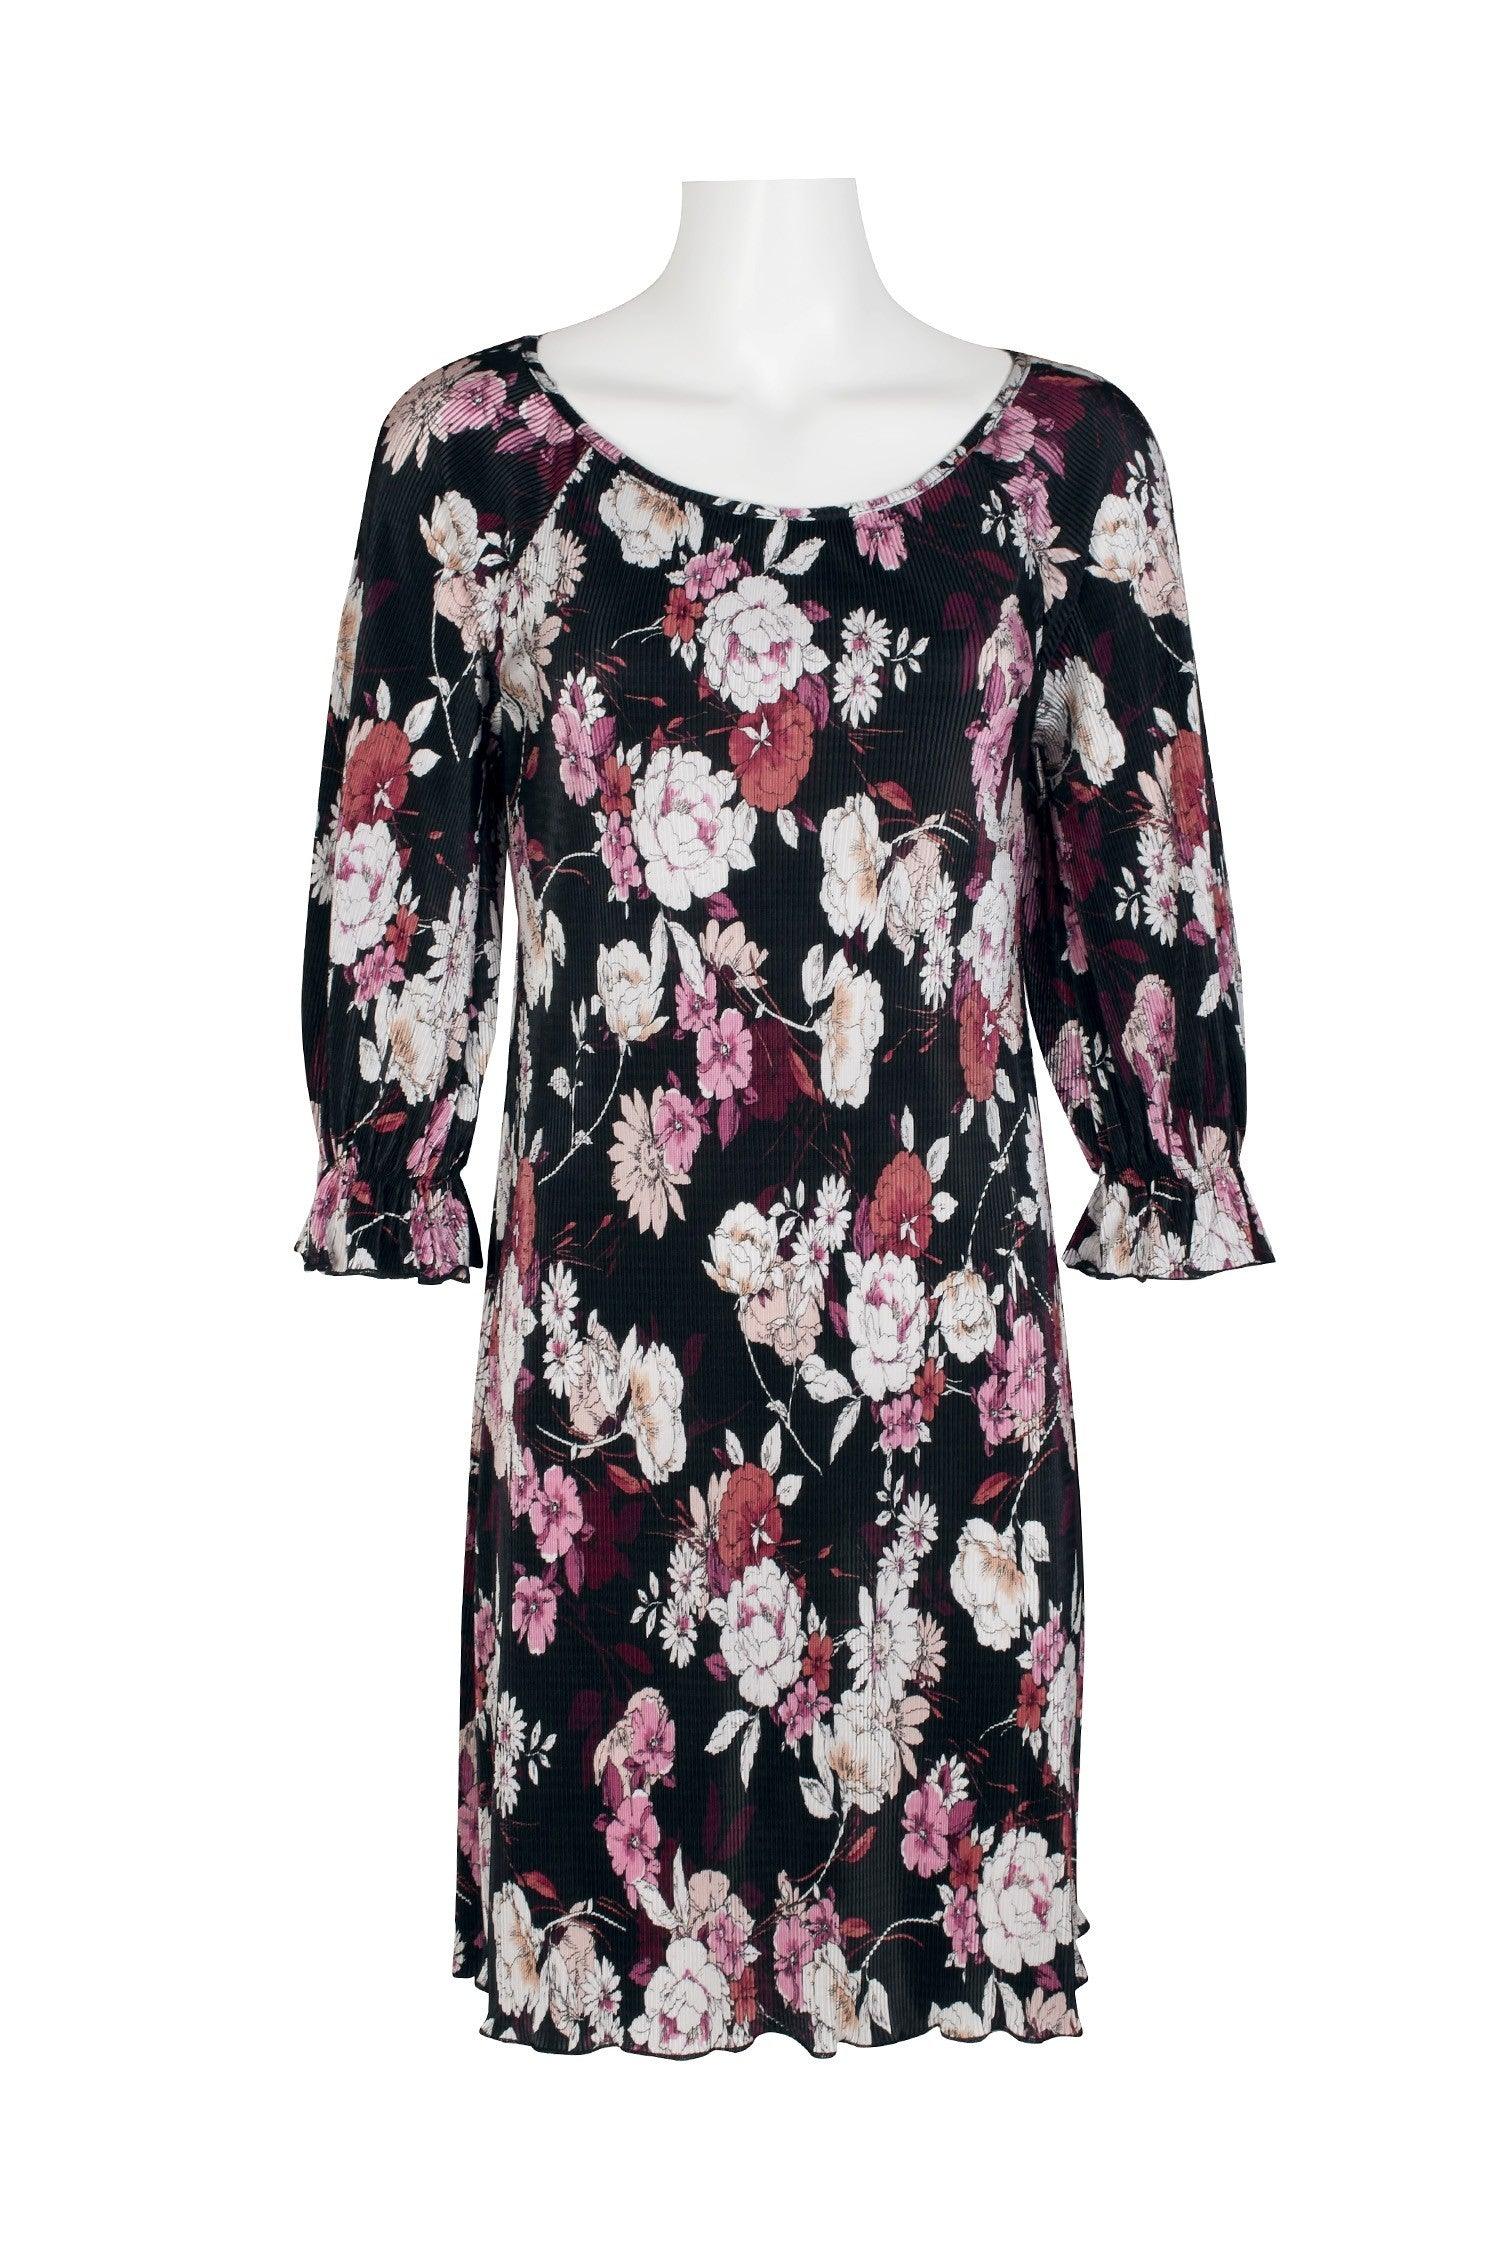 Connected Apparel Short 3/4 Sleeve Floral Dress - The Dress Outlet